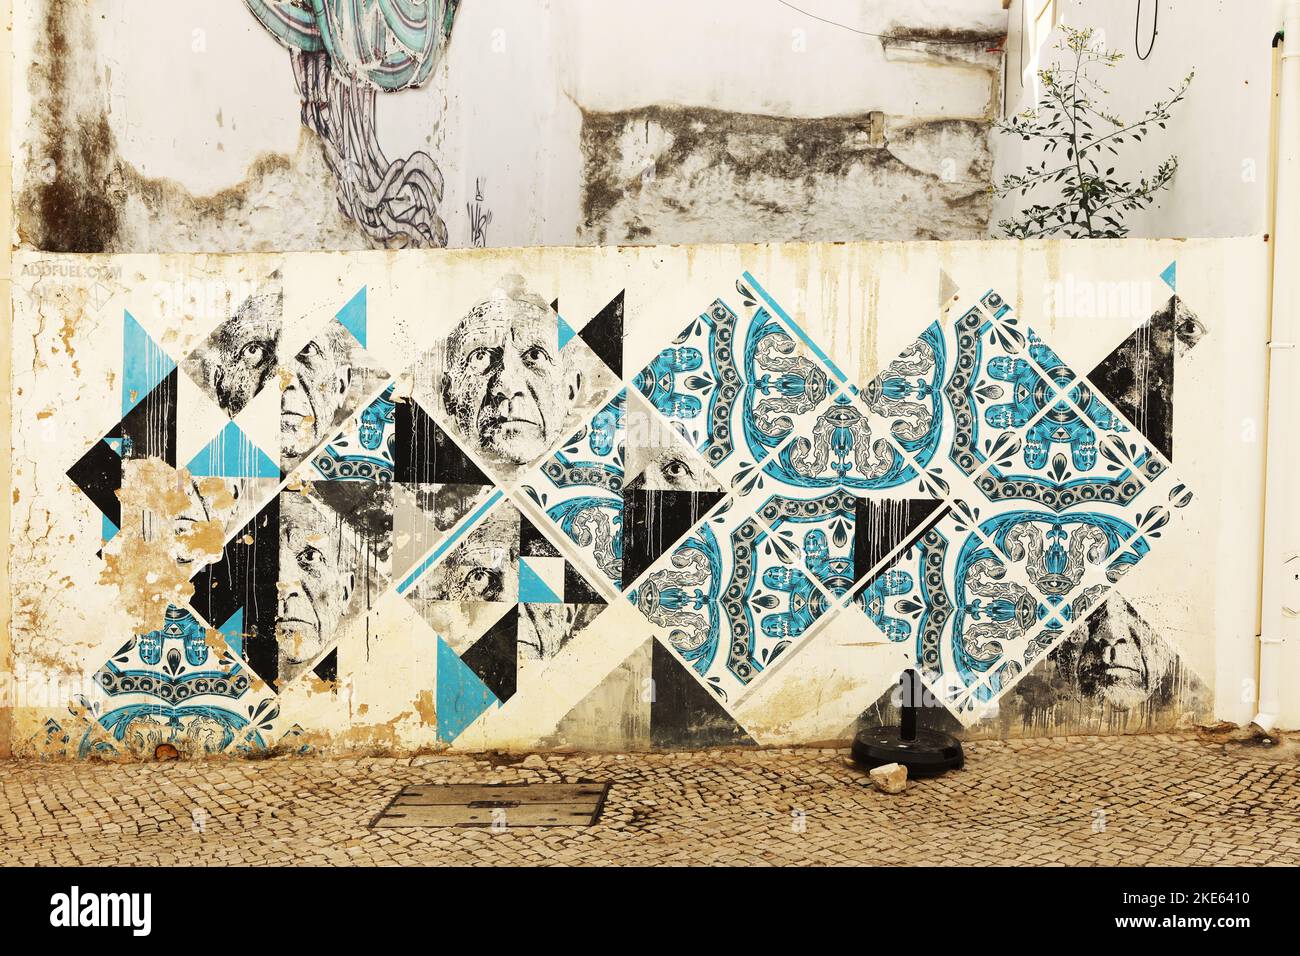 A mural of male faces and blue tiles on a wall in old town, Lagos, Algarve, Portugal Stock Photo